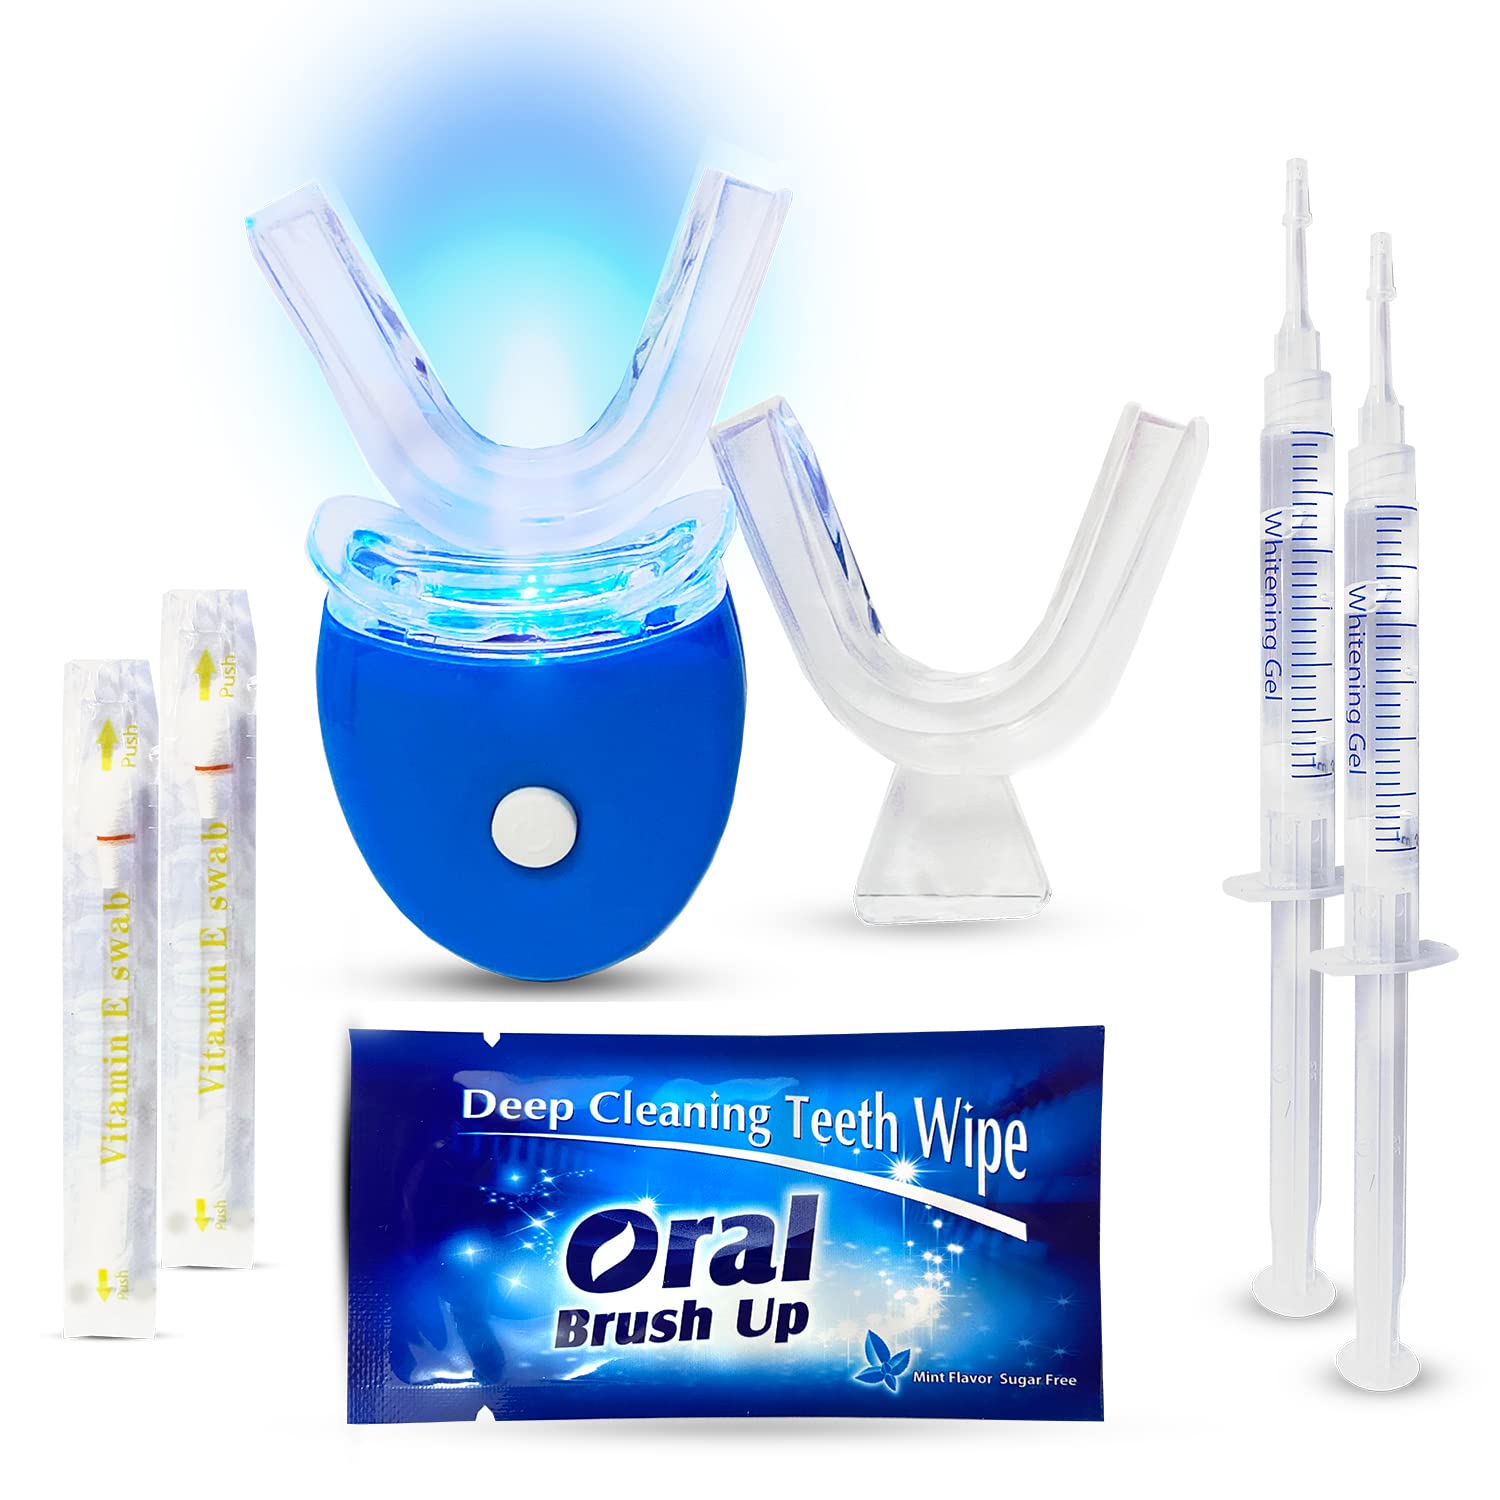 MagicBrite Complete Teeth Whitening Kit 2 Carbamide Peroxide Whitening Gel Pens with 1 LED Light At Home Whitening - image 7 of 10